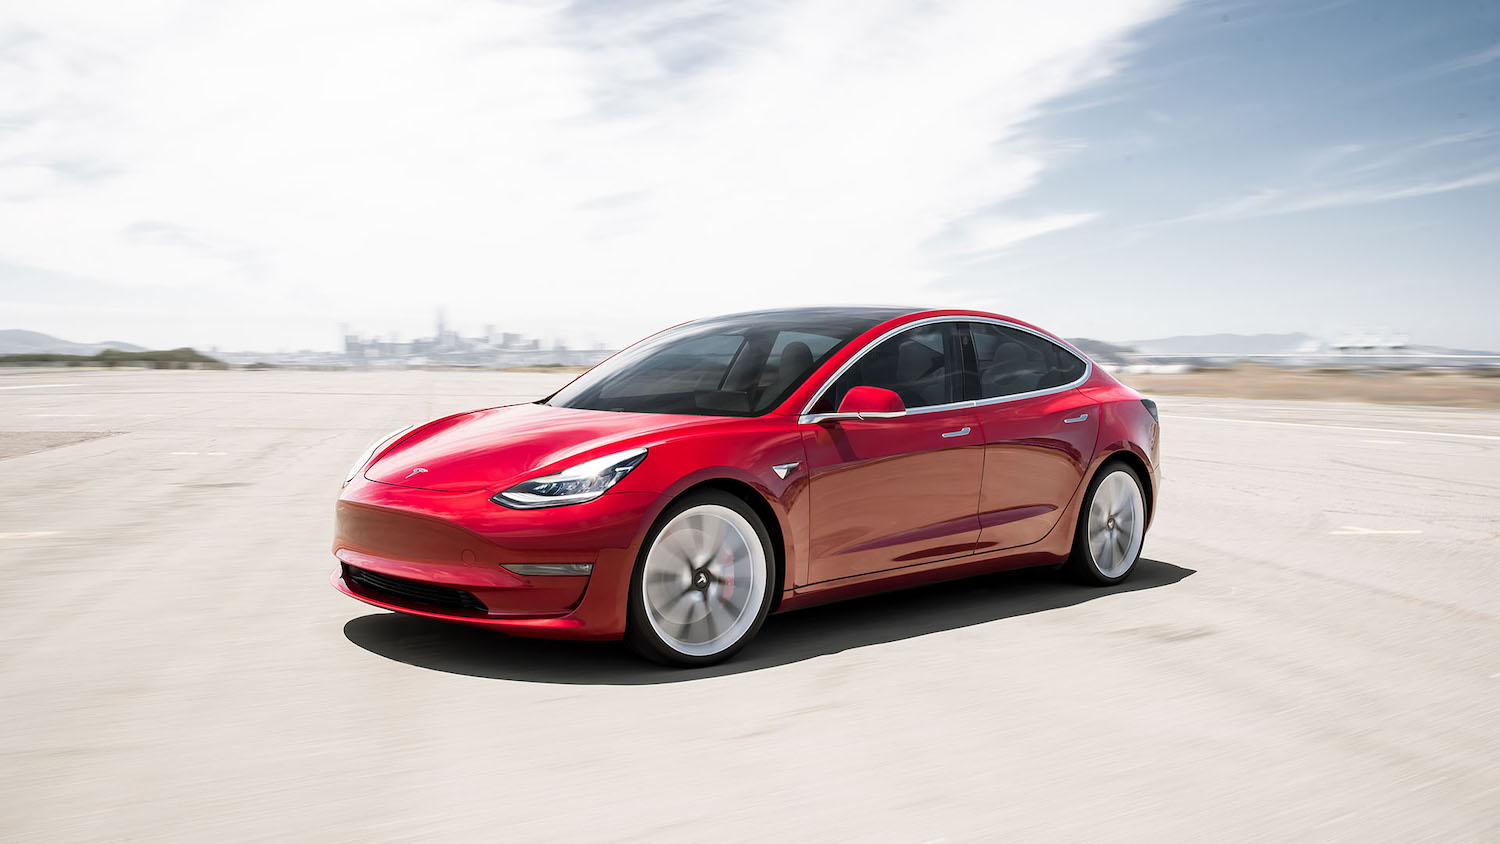 Tesla's Model 3 Highland Refresh: More Rumors Point to Imminent Release